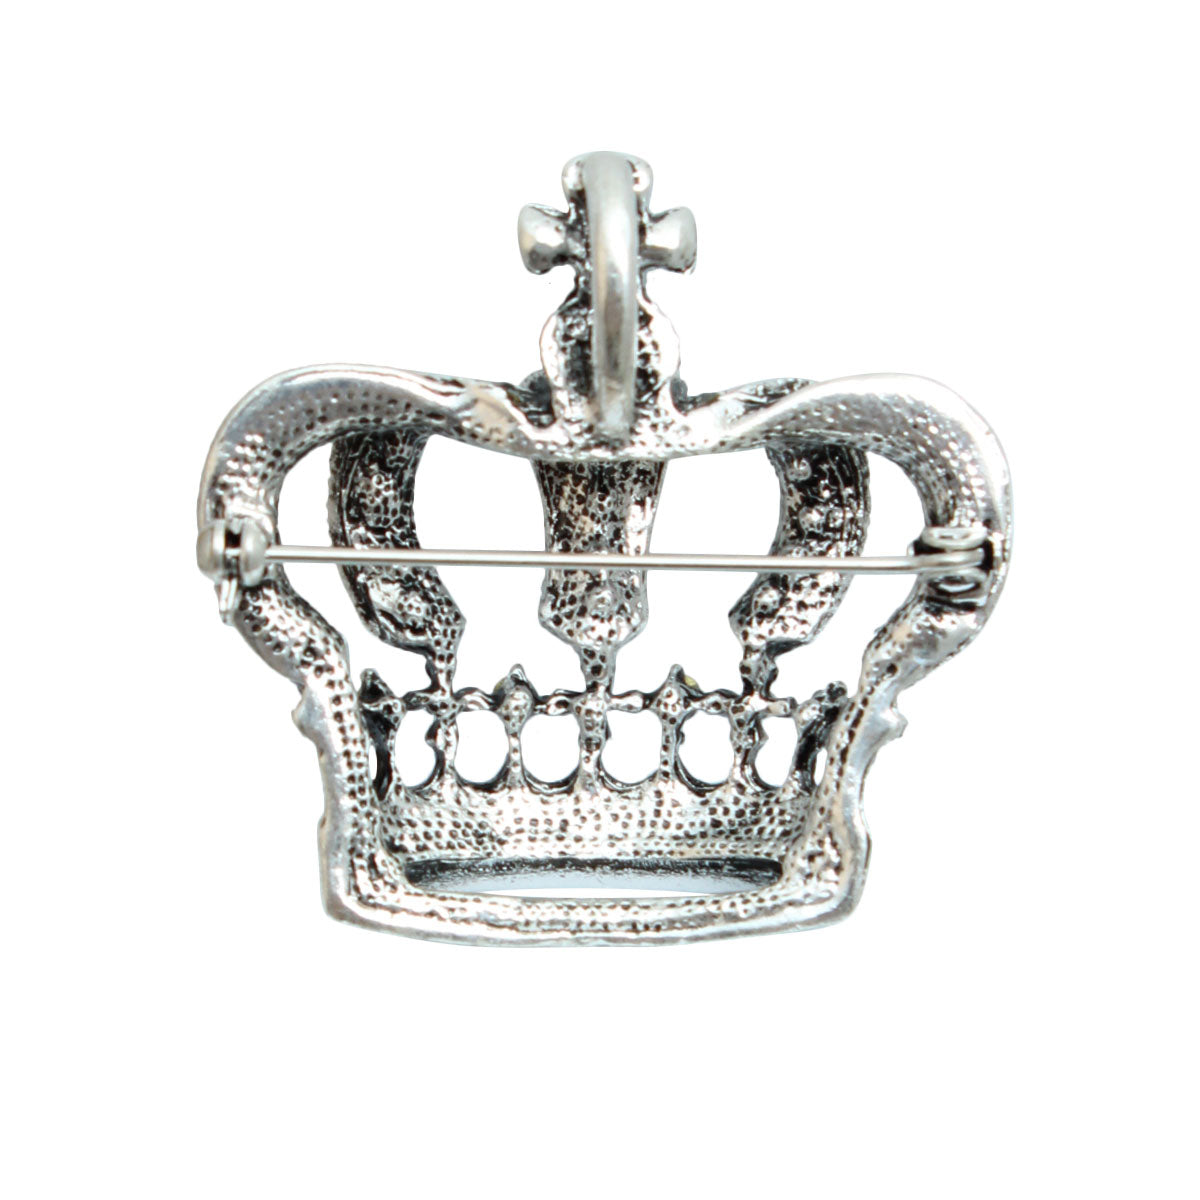 Burnished Silver King Crown Brooch